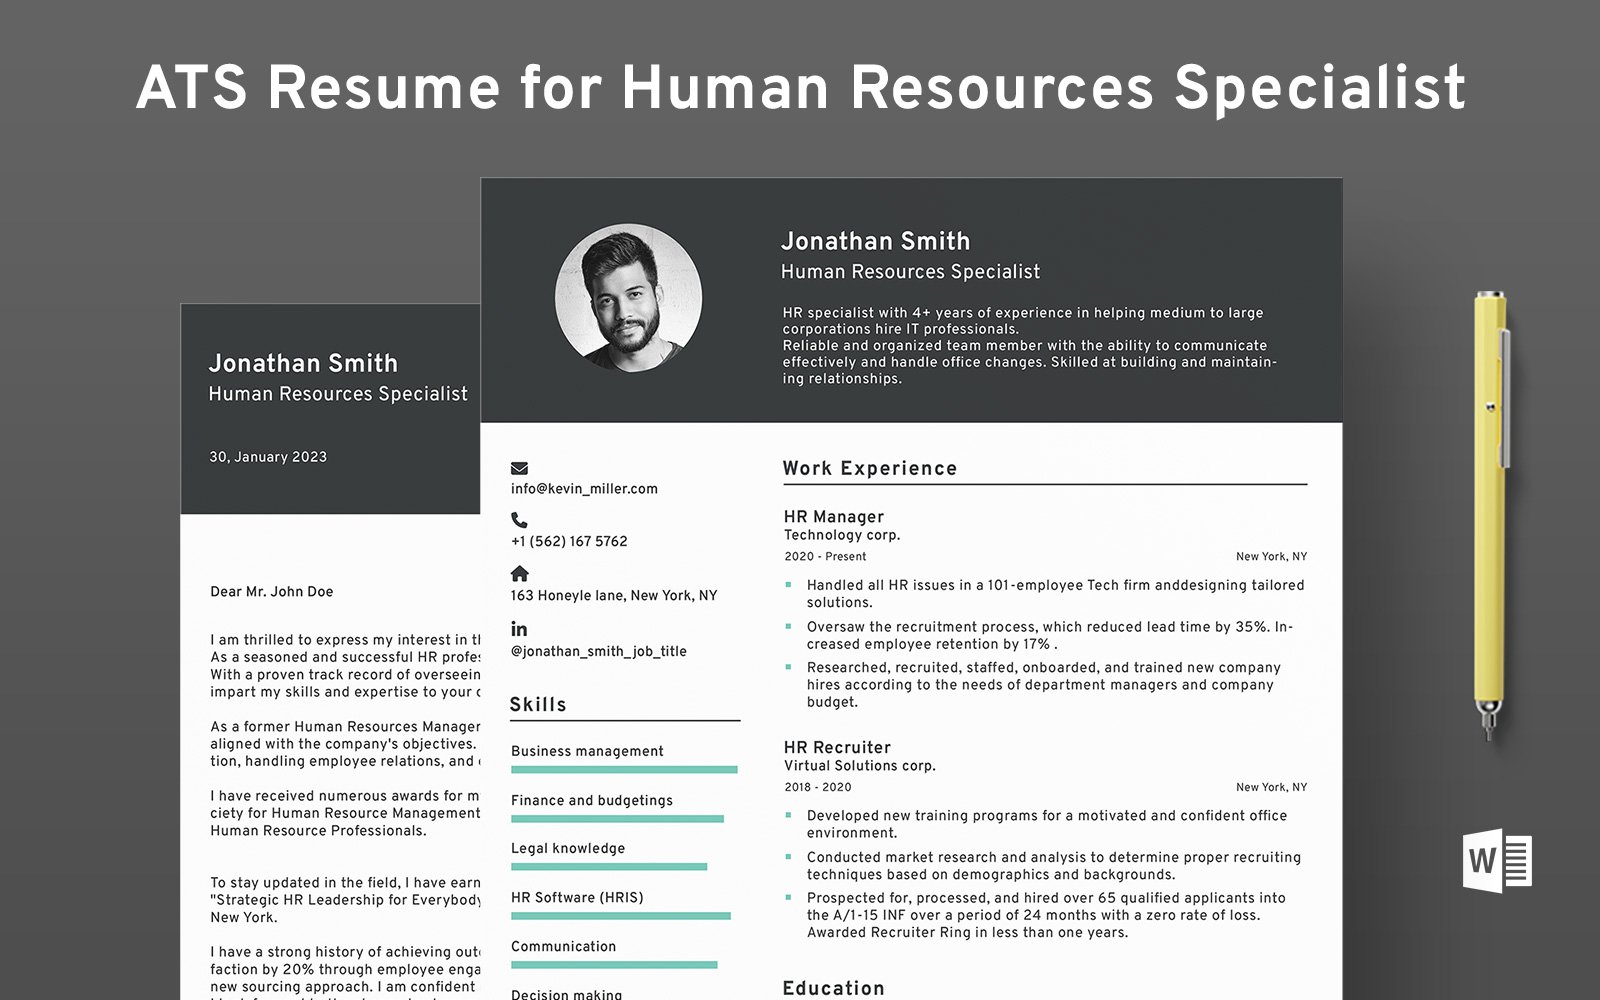 ATS Resume for Human Resources Specialist